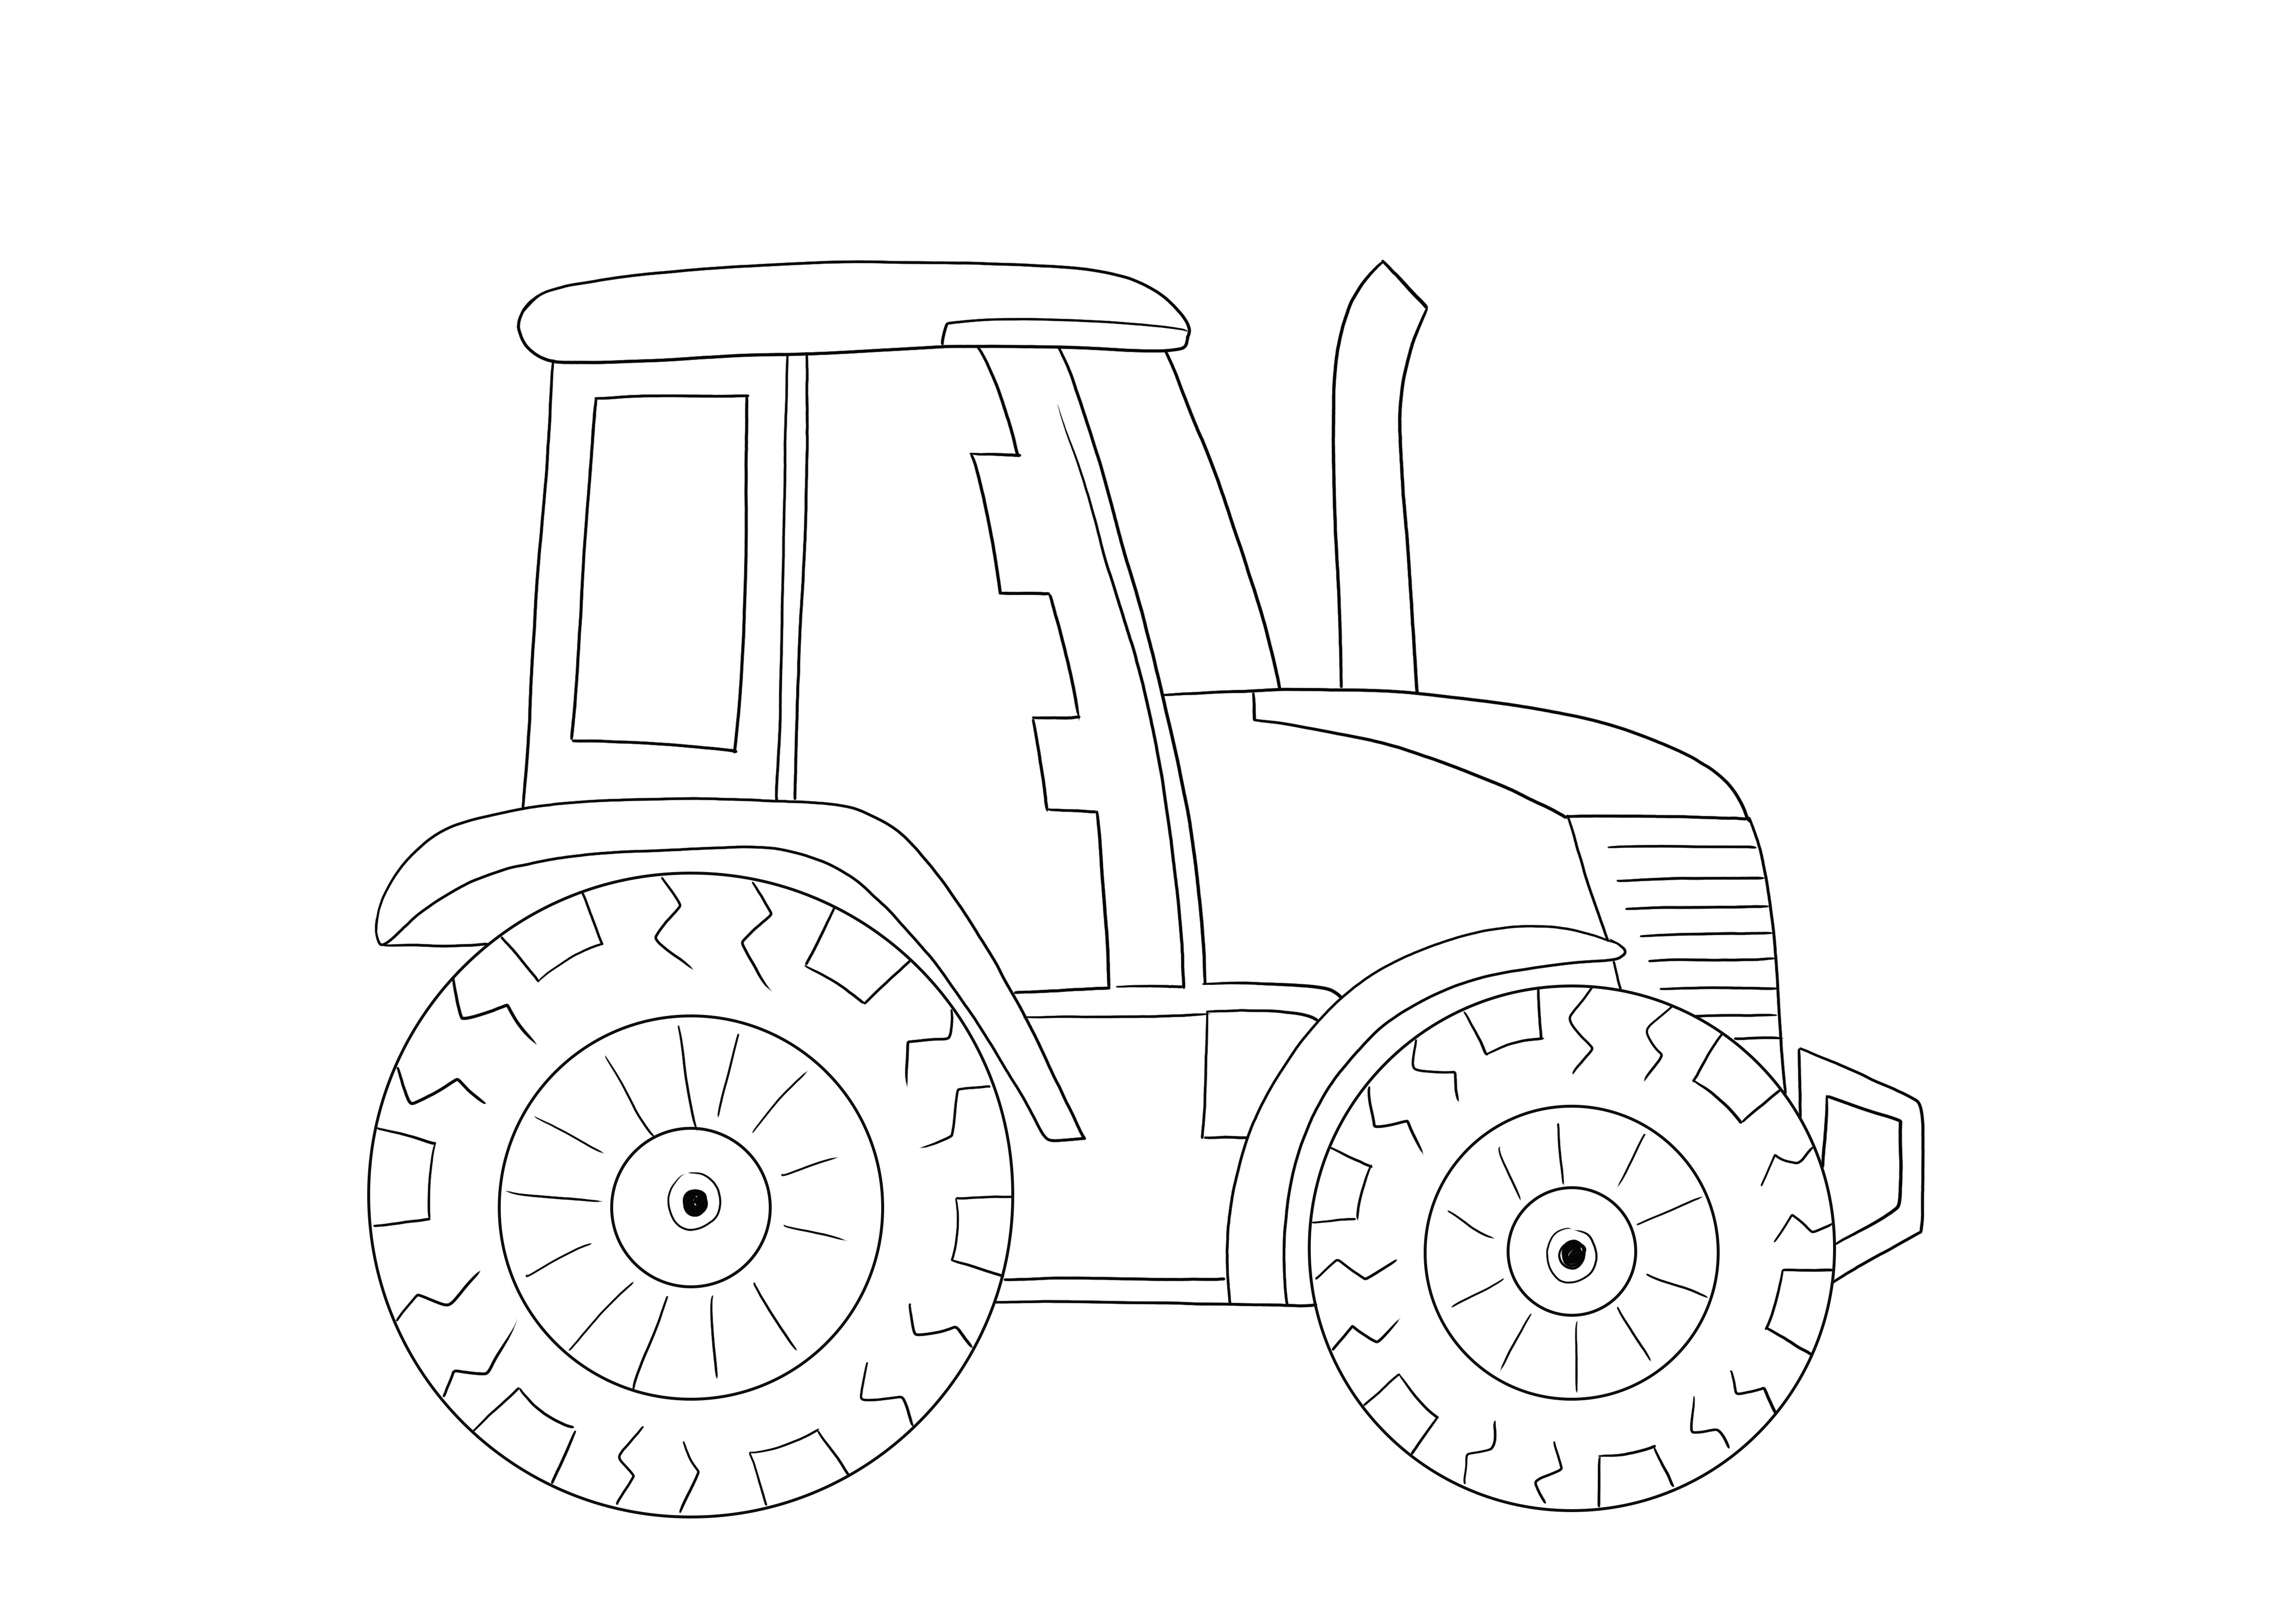 Tractor Emoji is an easy coloring image free to print and download